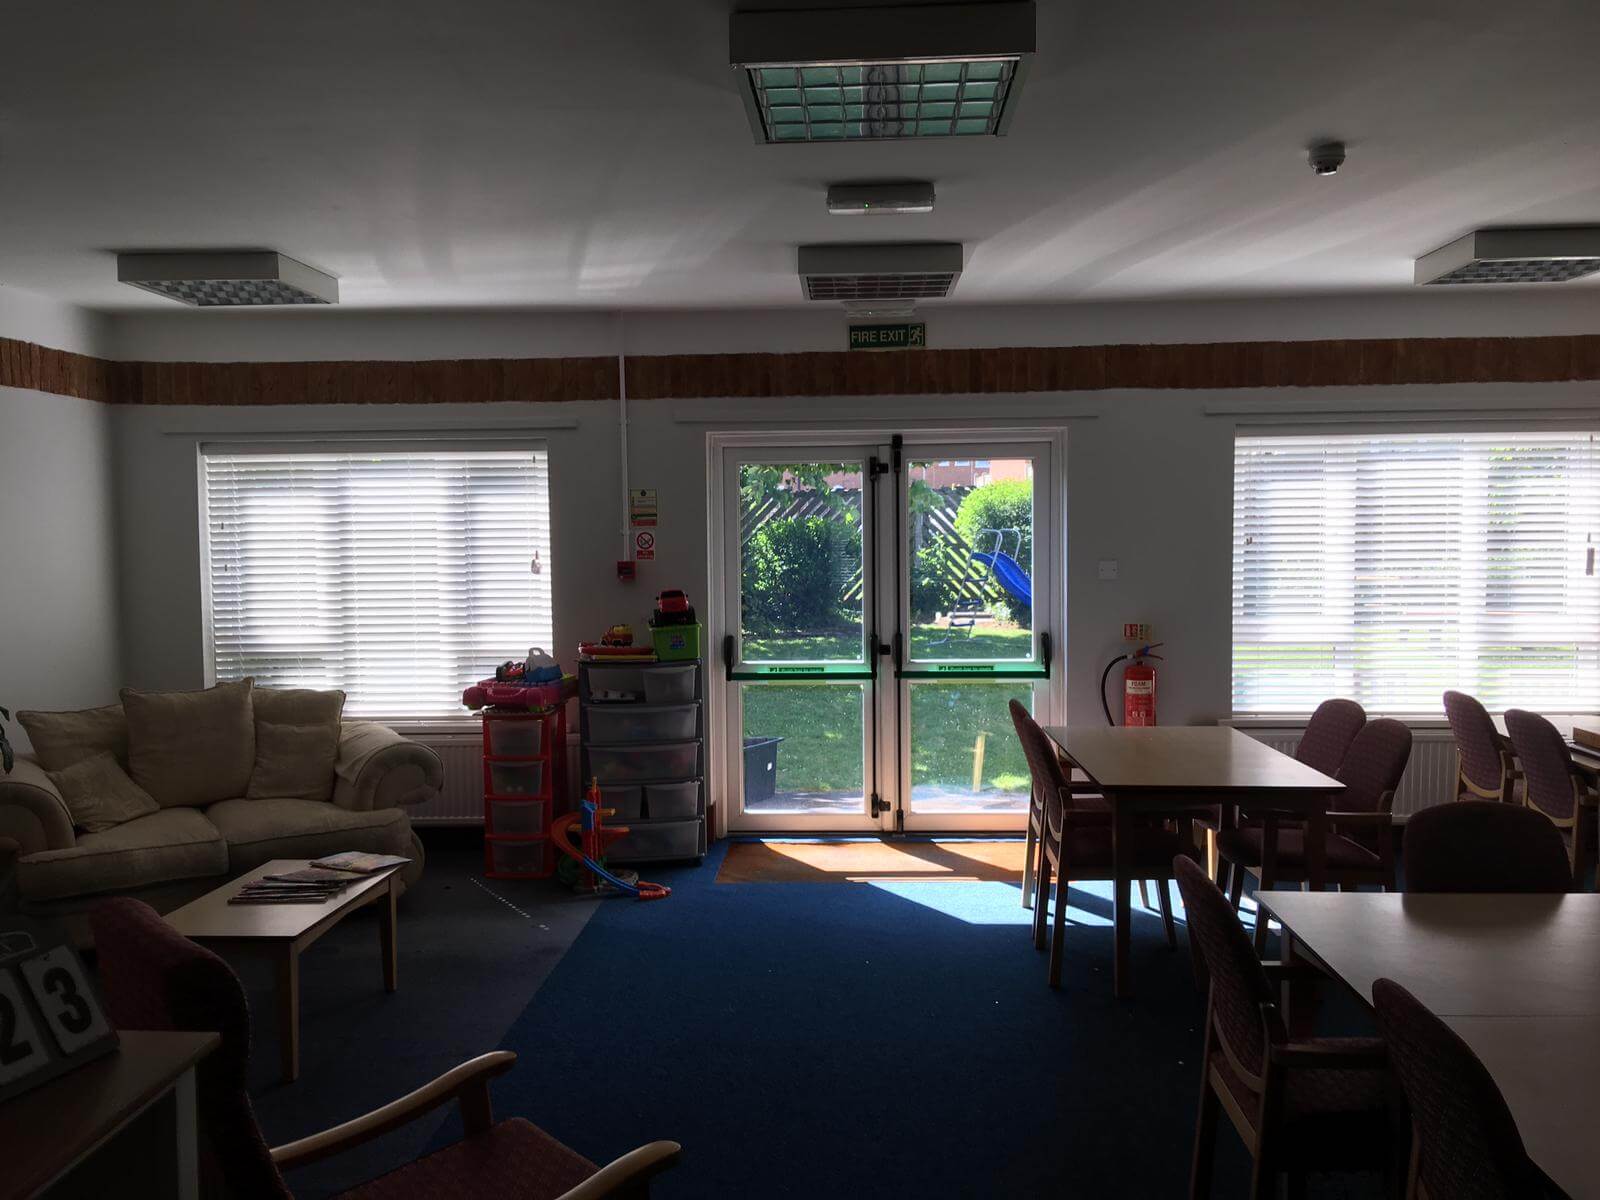 Commercial Blinds For Care Homes